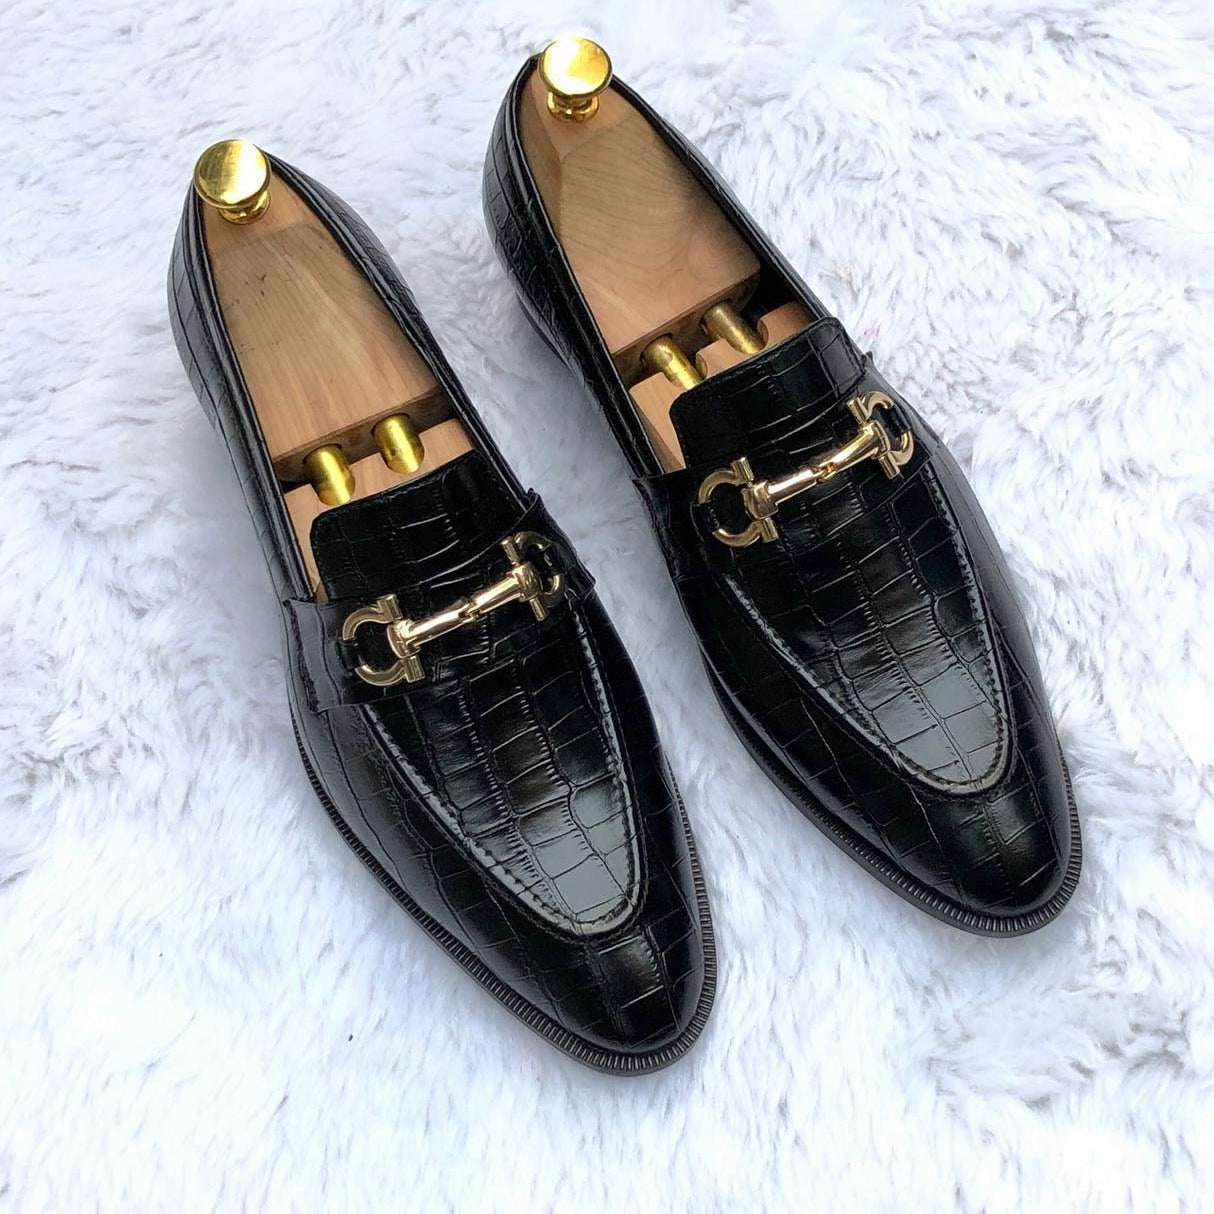 New Fashionable Loafers For Men Party Wear and Formal Office wear Shoes-Jackmarc